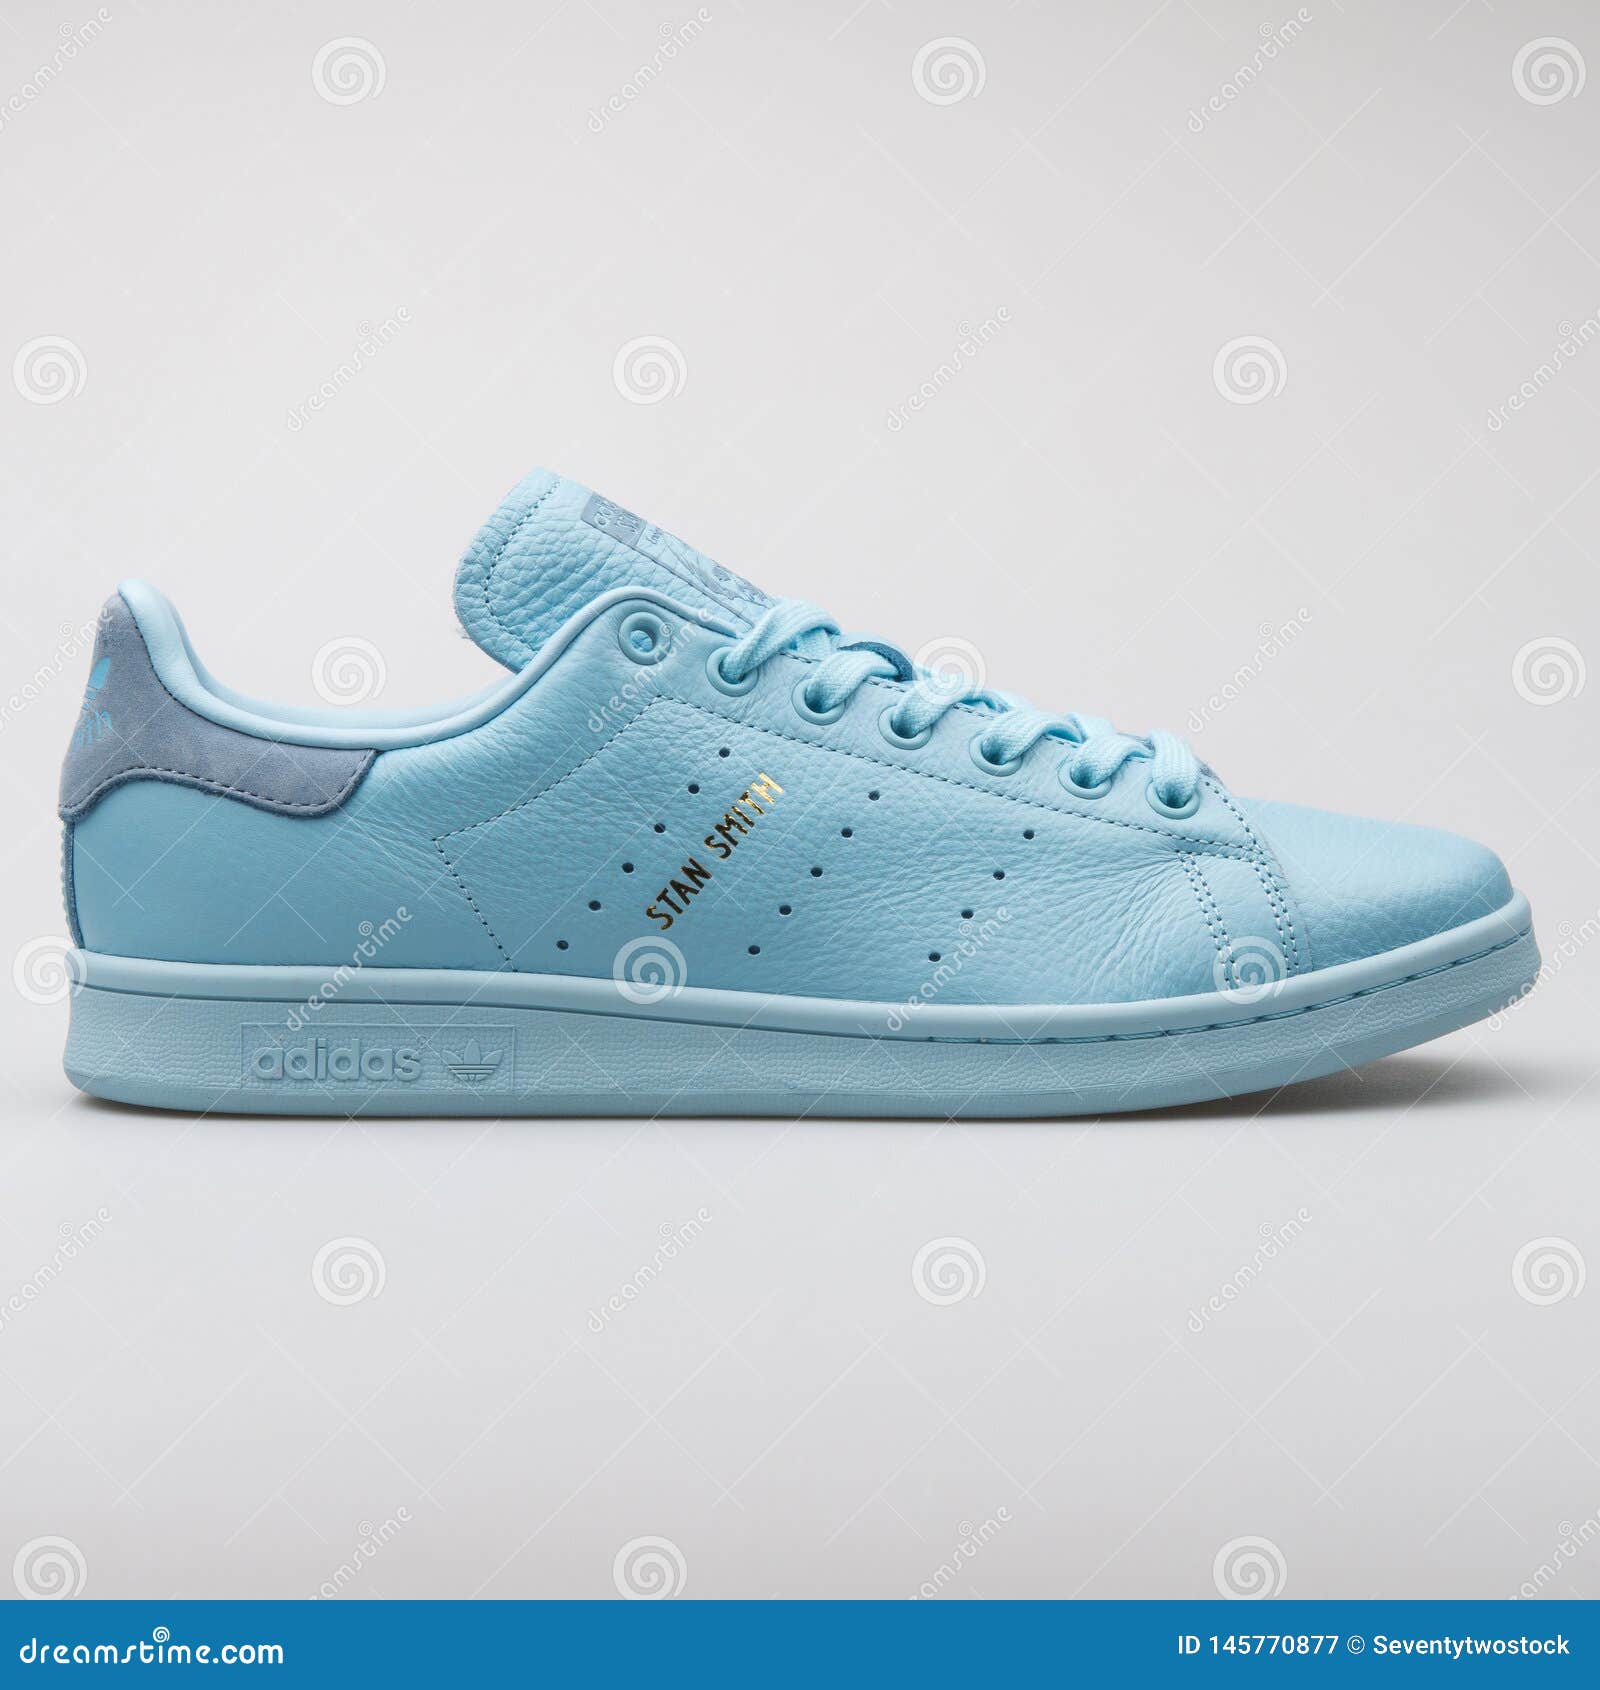 stan smith shoes light blue